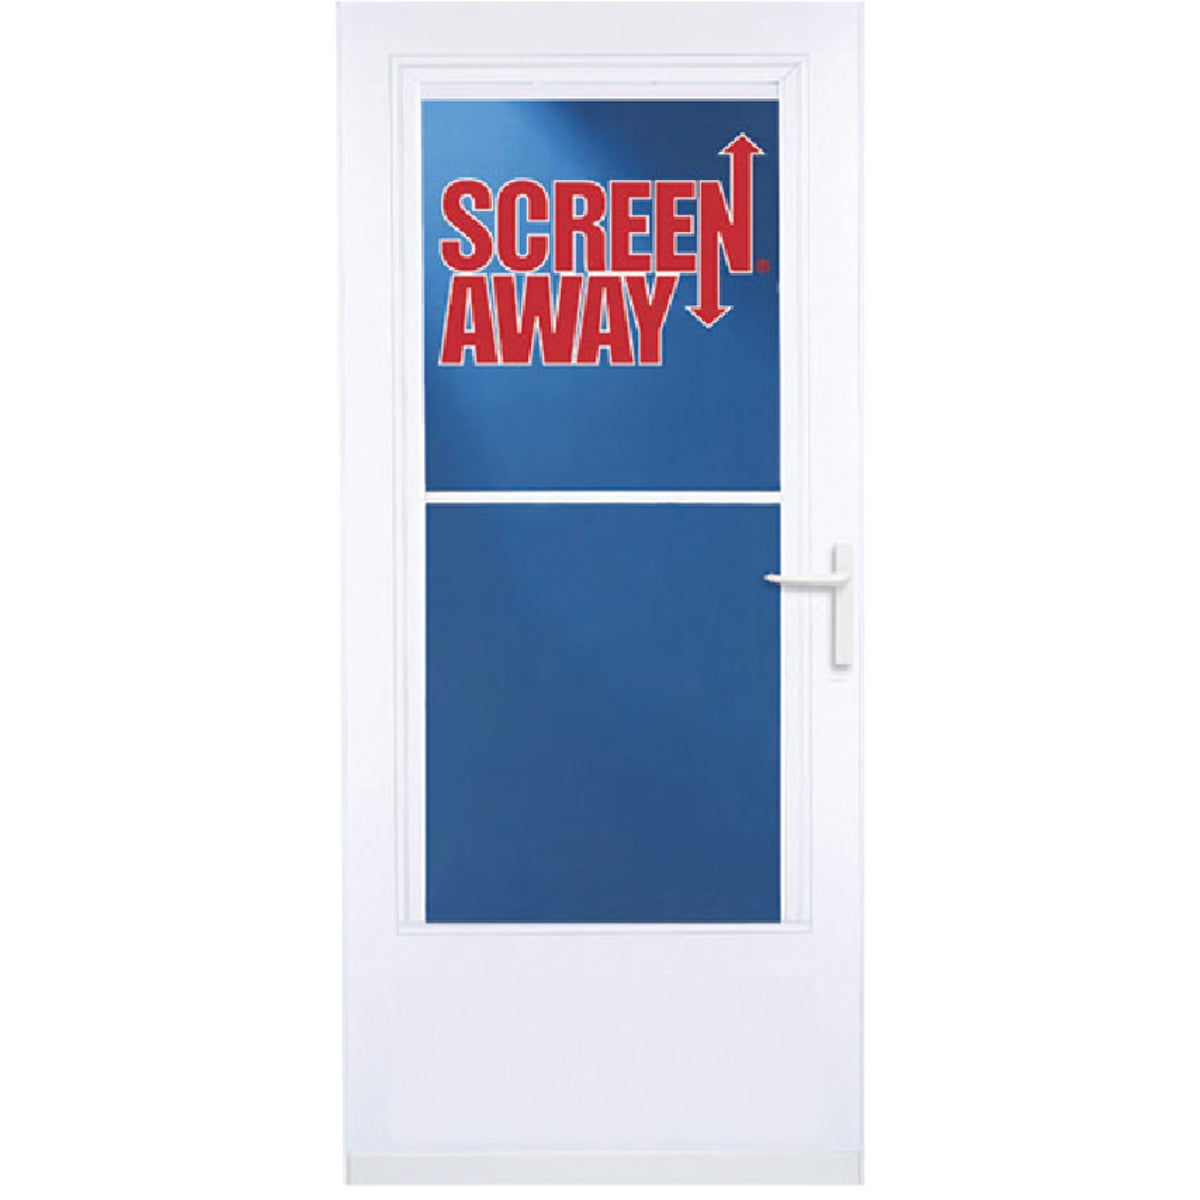 Item 184772, Heavy-duty storm door featuring retractable screen that disappears when not